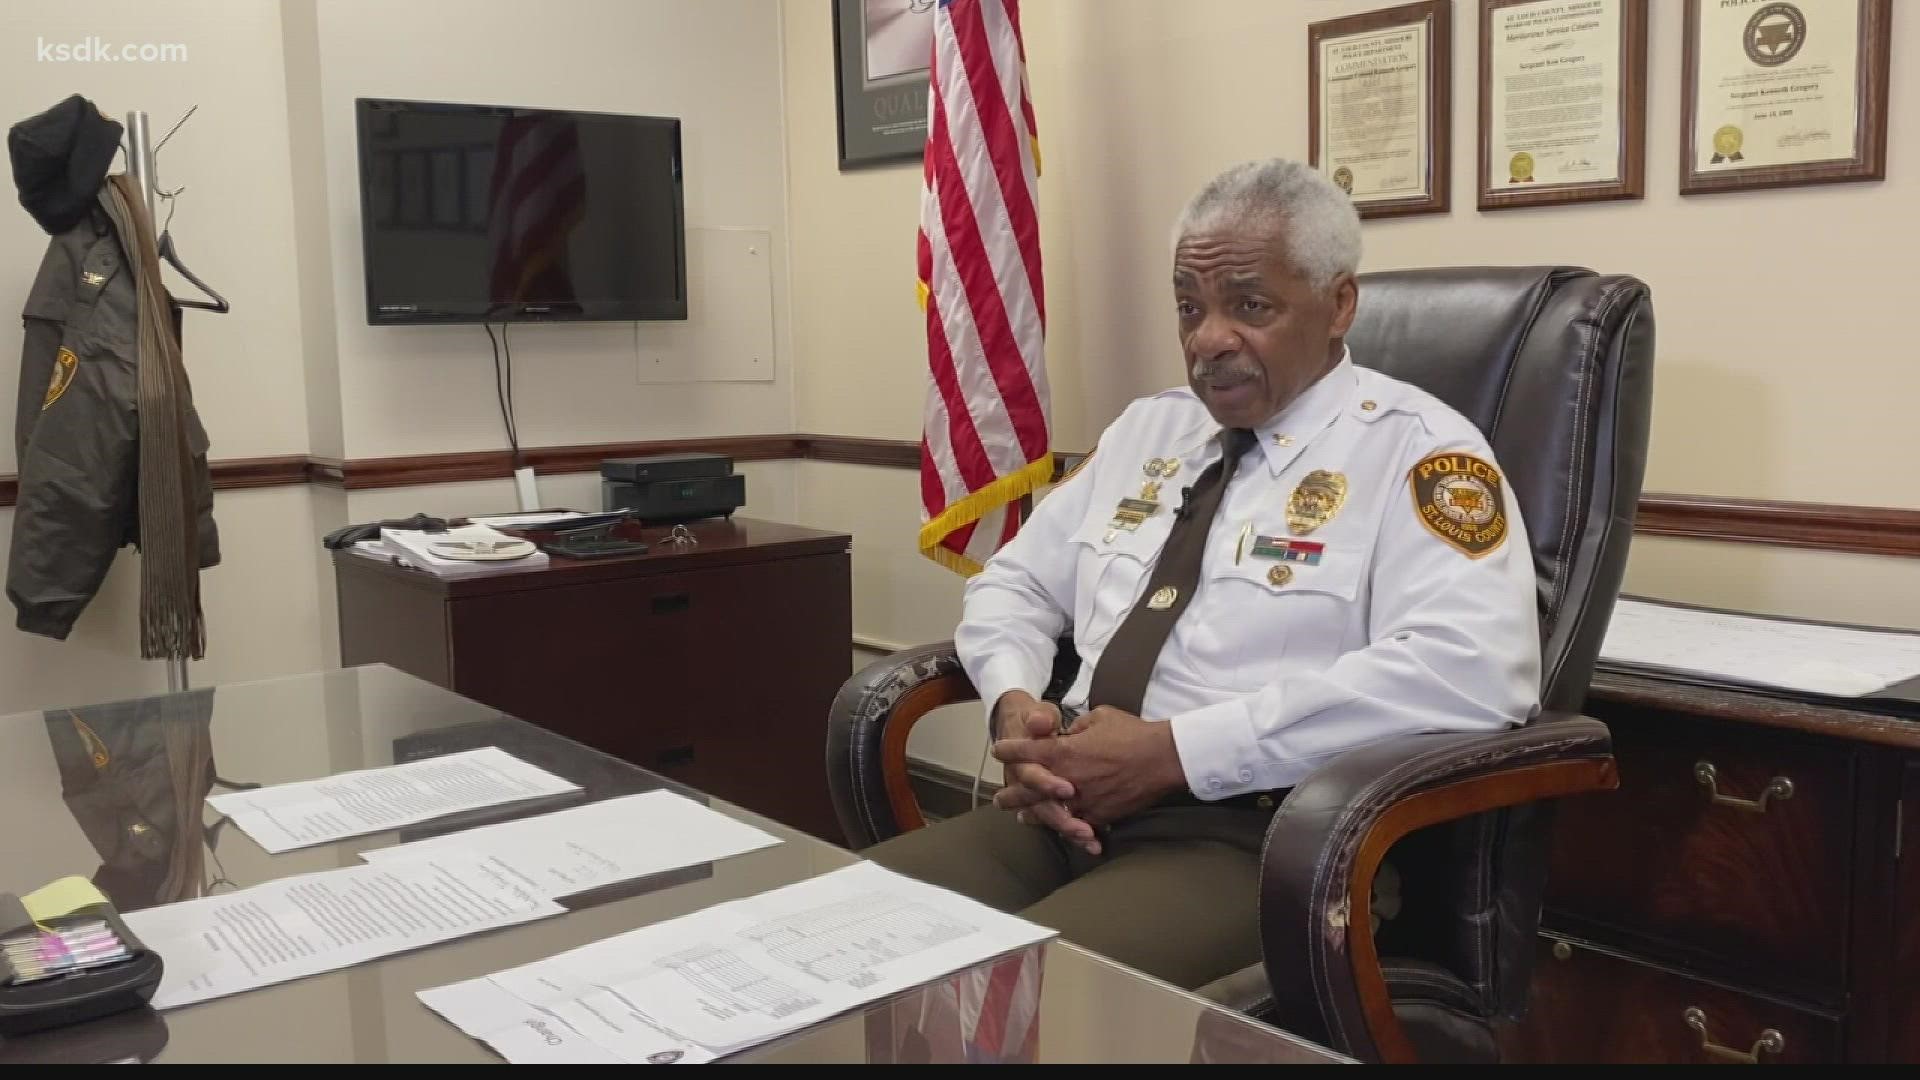 Kenneth Gregory was named the new St. Louis County chief of police. For the last six months, he's been the interim police chief.